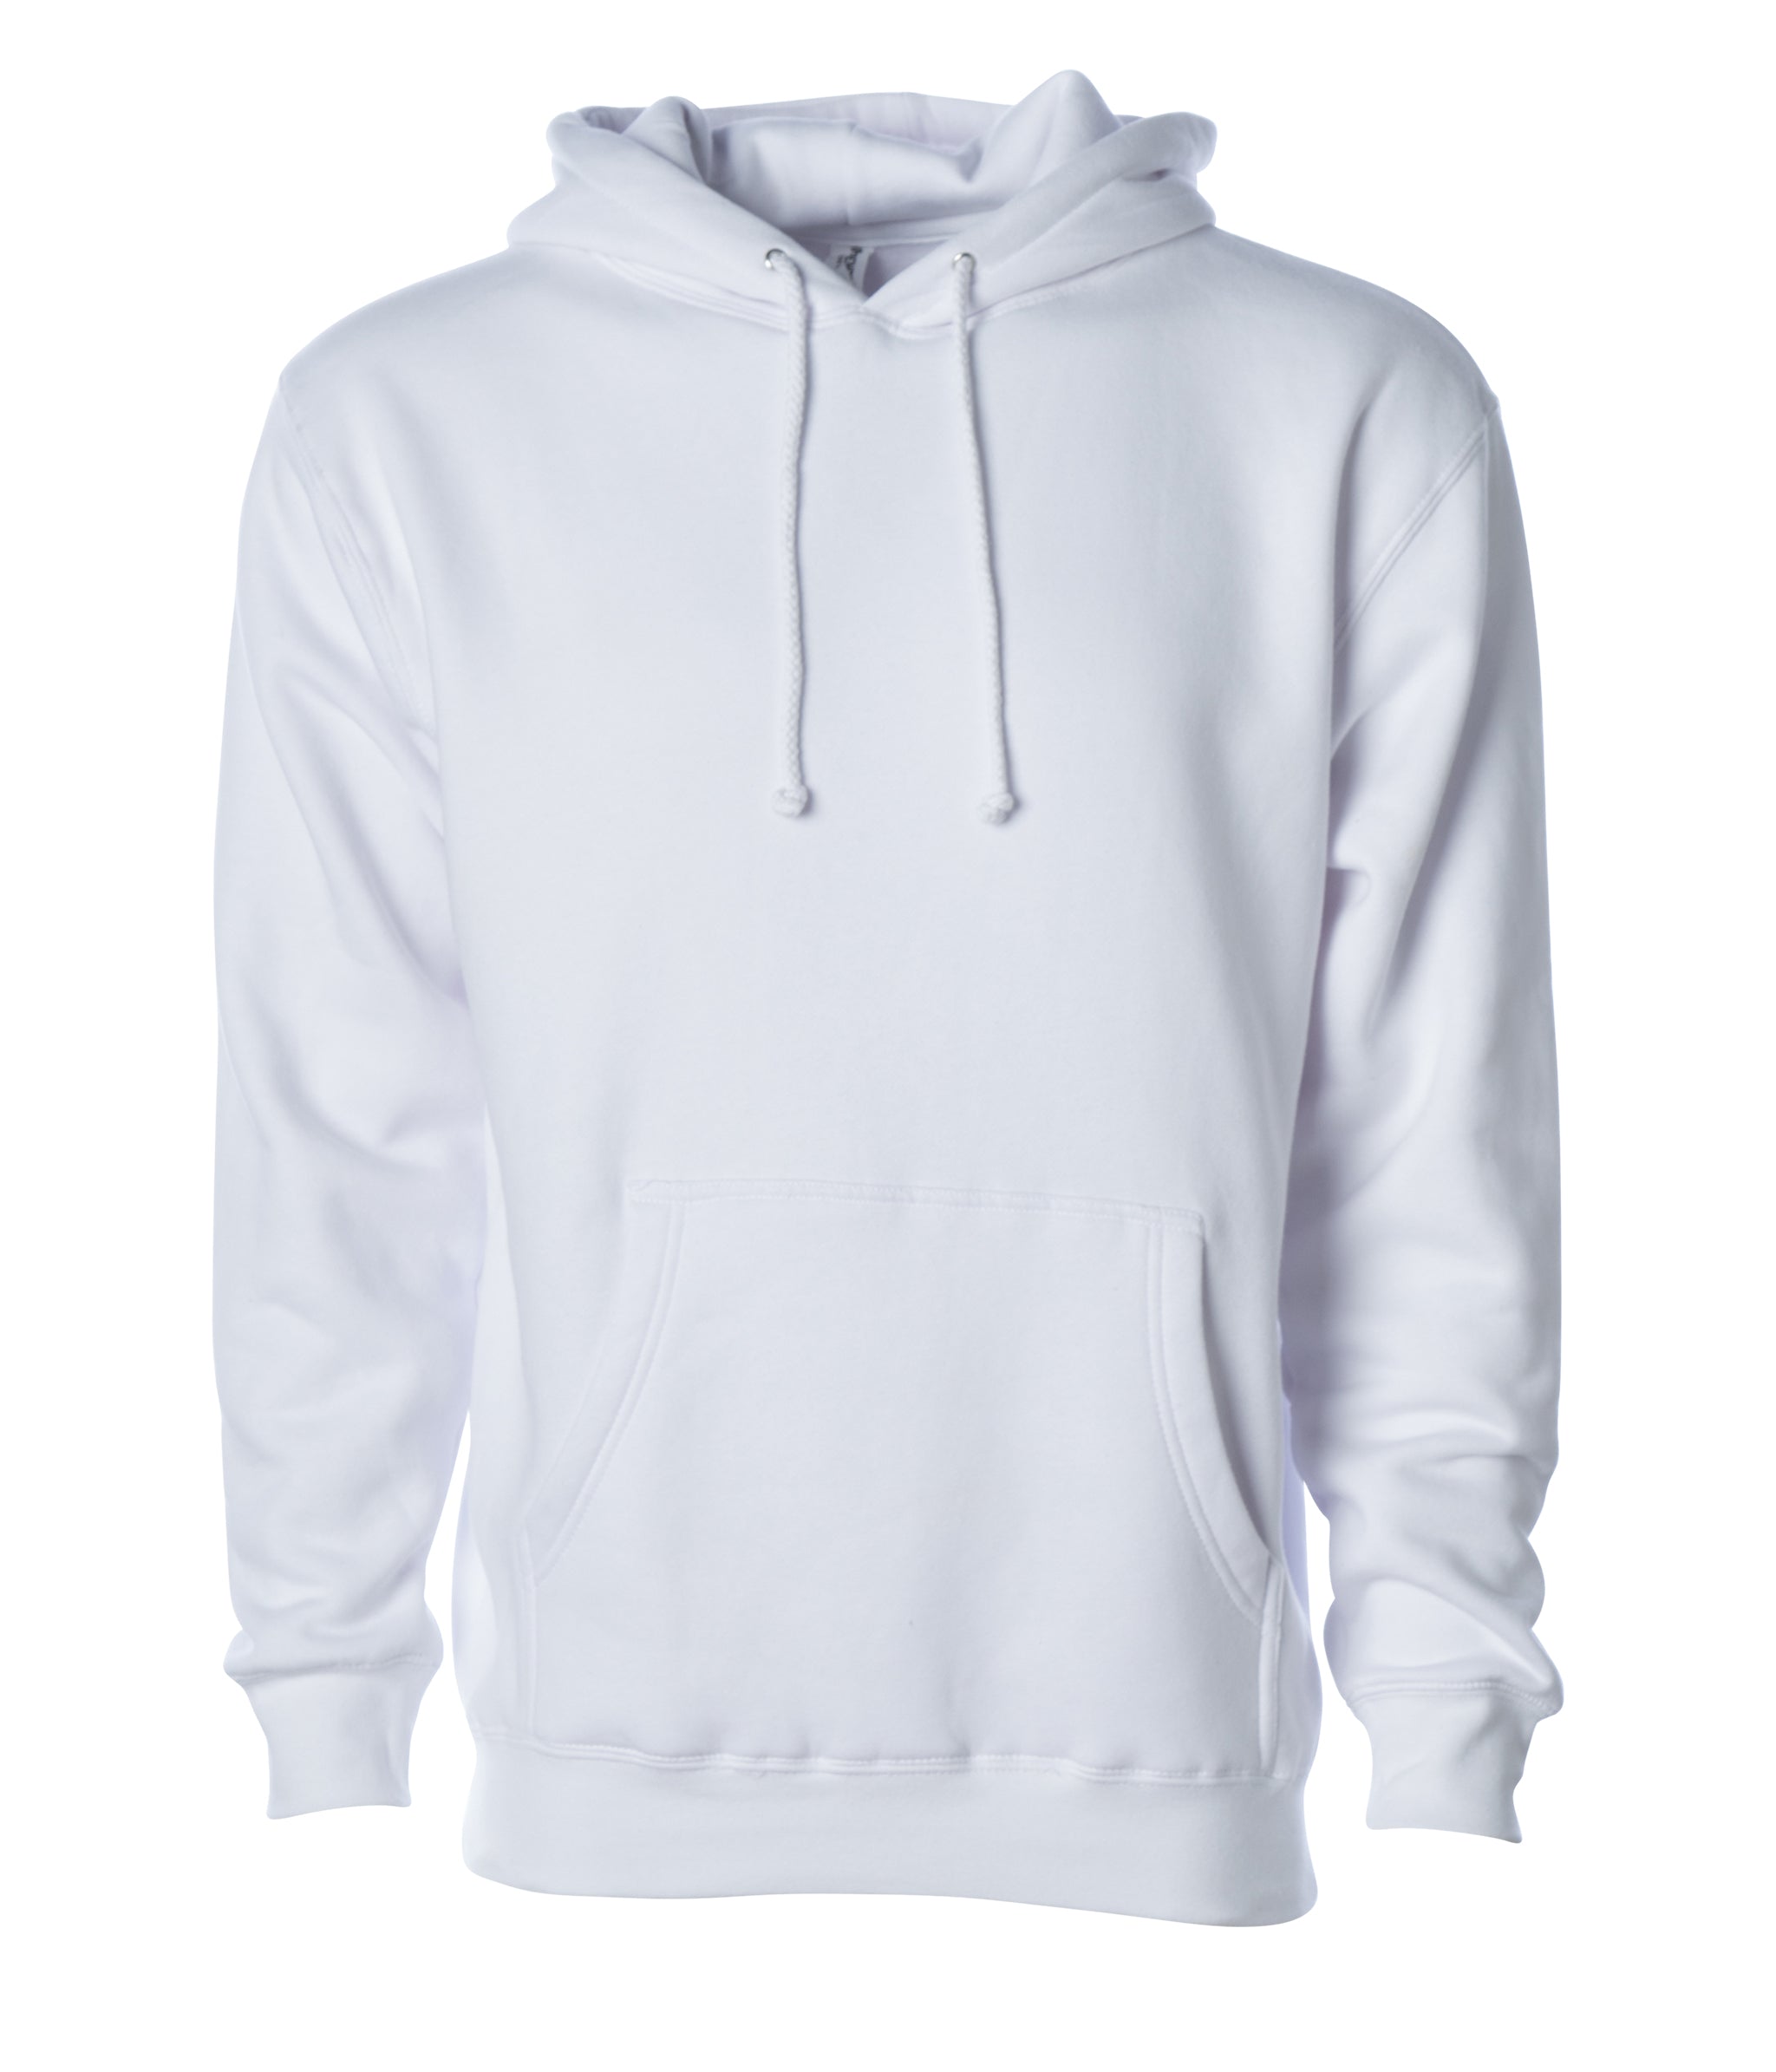 Download Heavyweight Hooded Pullover Sweatshirts Classic Colors Independent Trading Company